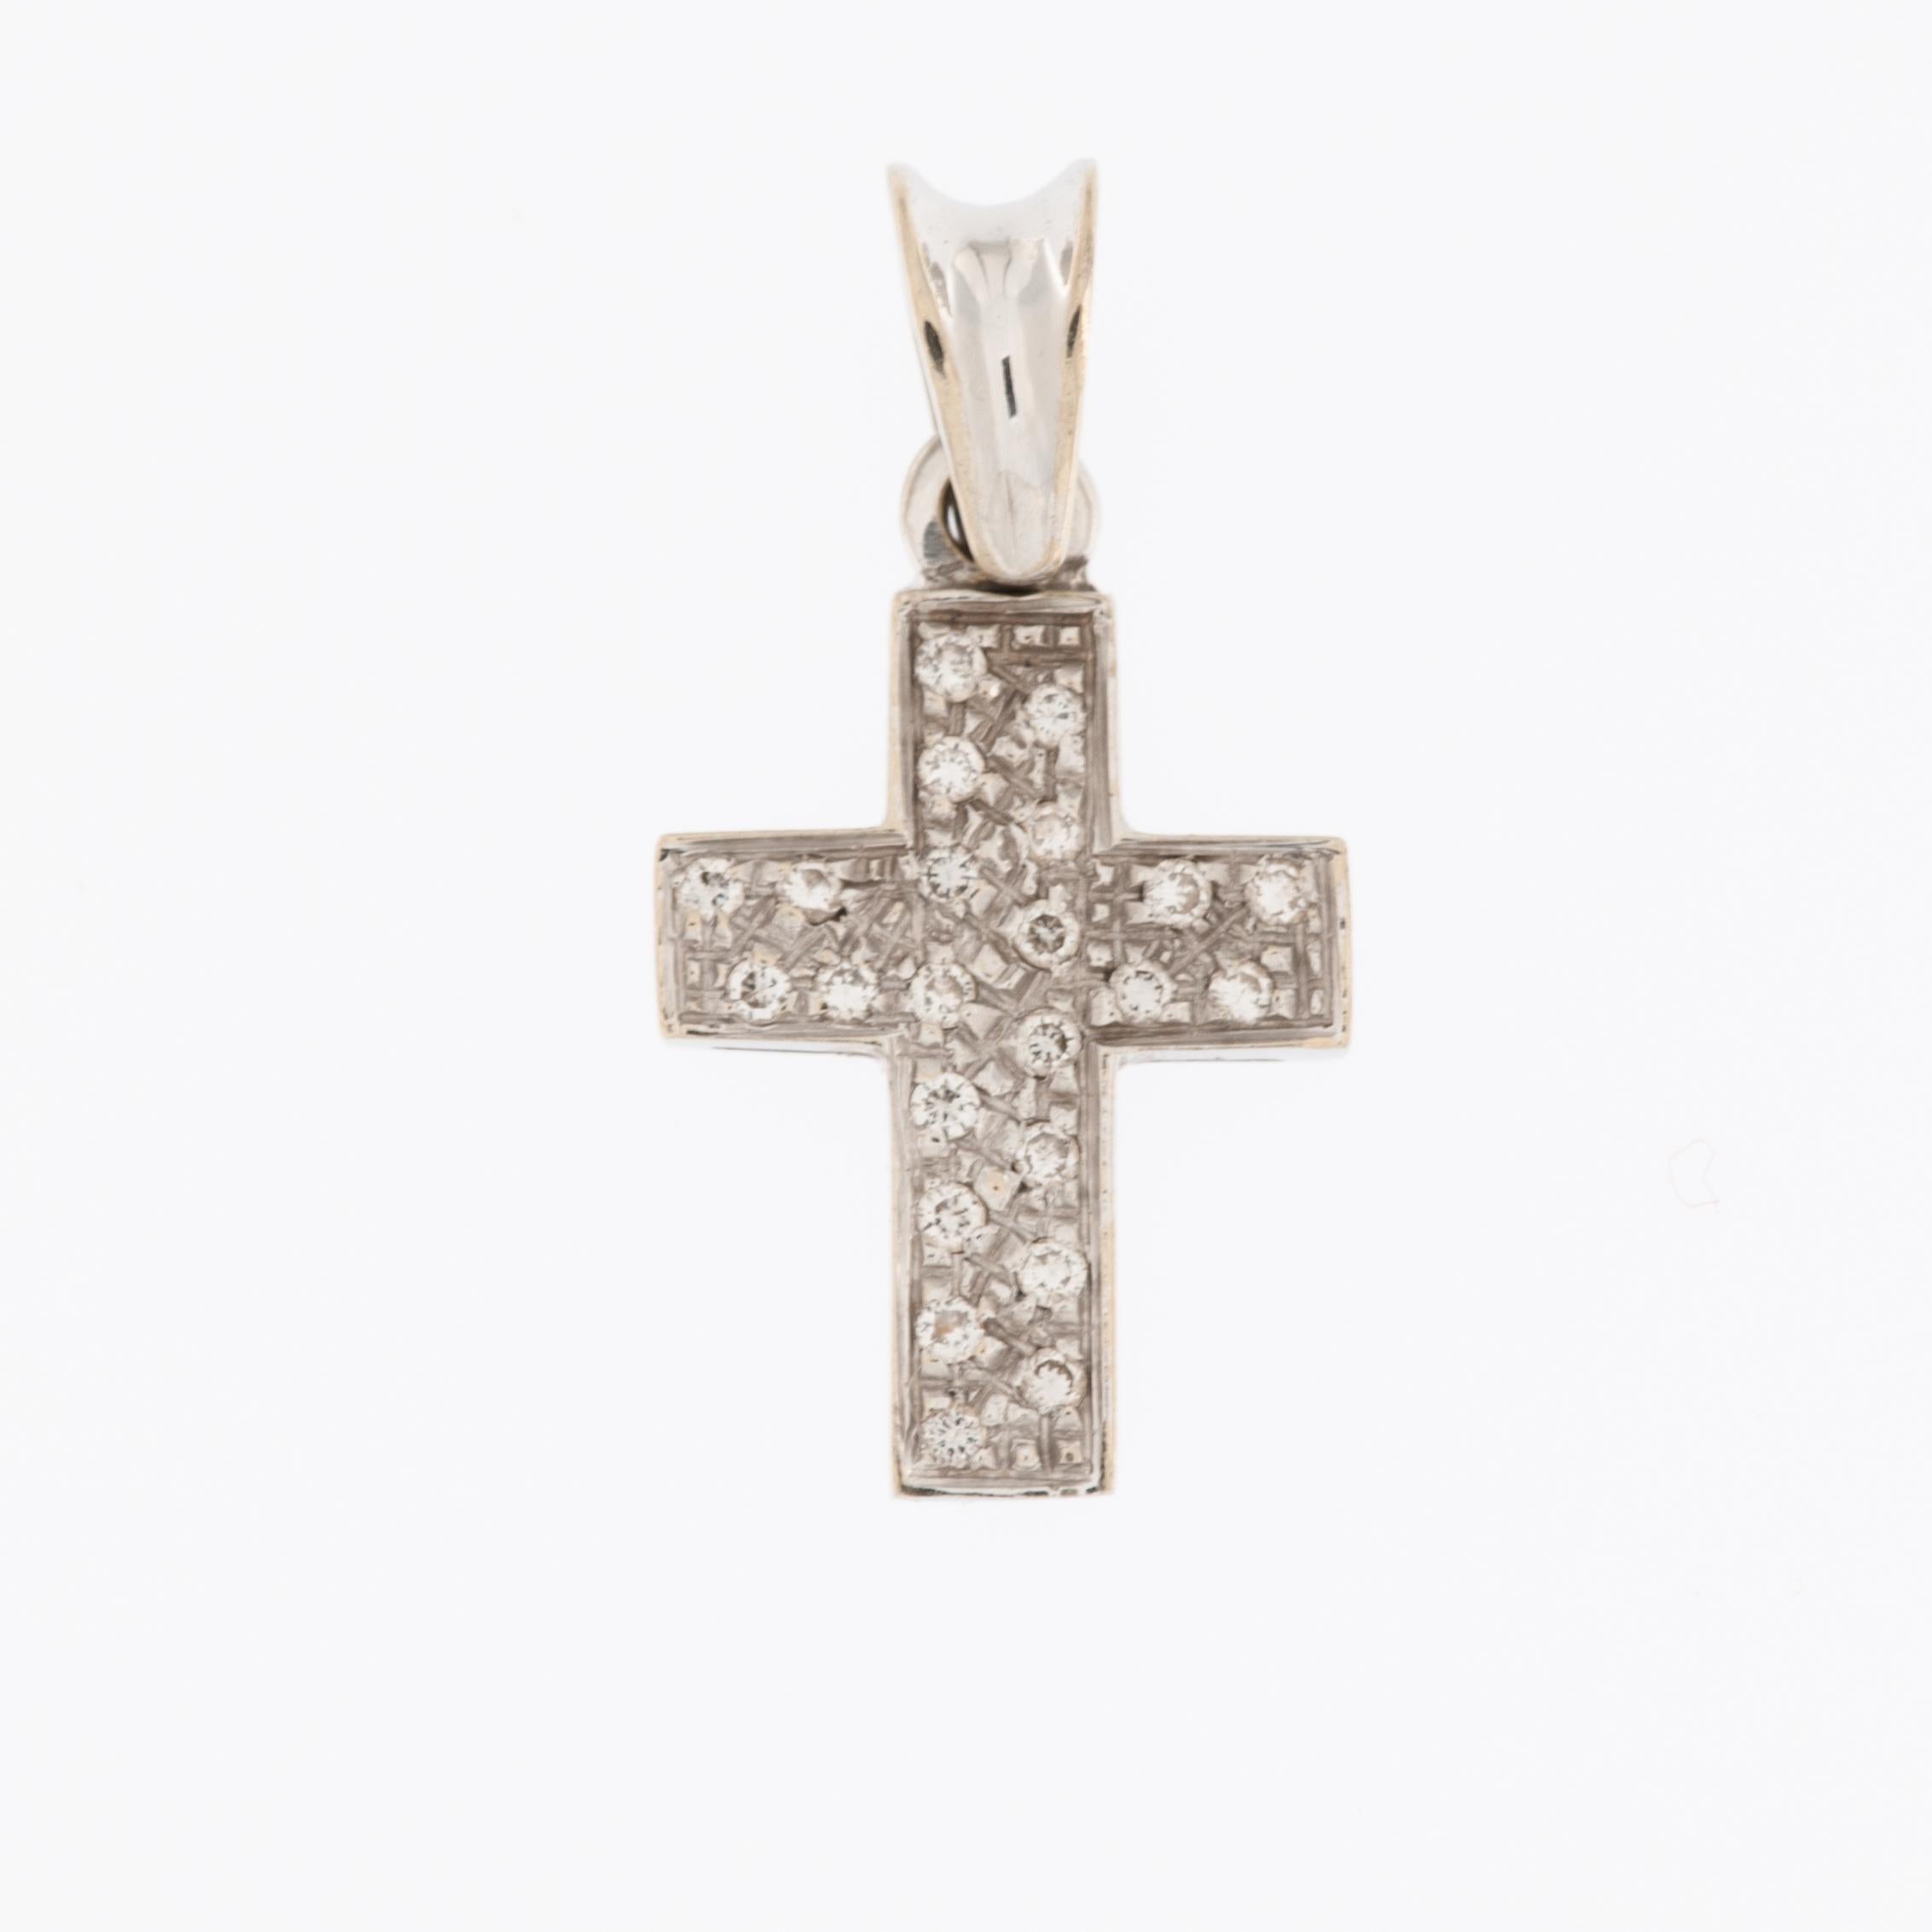 The Vintage Italian 18kt White Gold Cross with Diamonds is a beautiful and timeless piece of jewelry with several distinctive features.

Vintage indicates that the cross is not a modern creation but rather an older piece of jewelry that may have